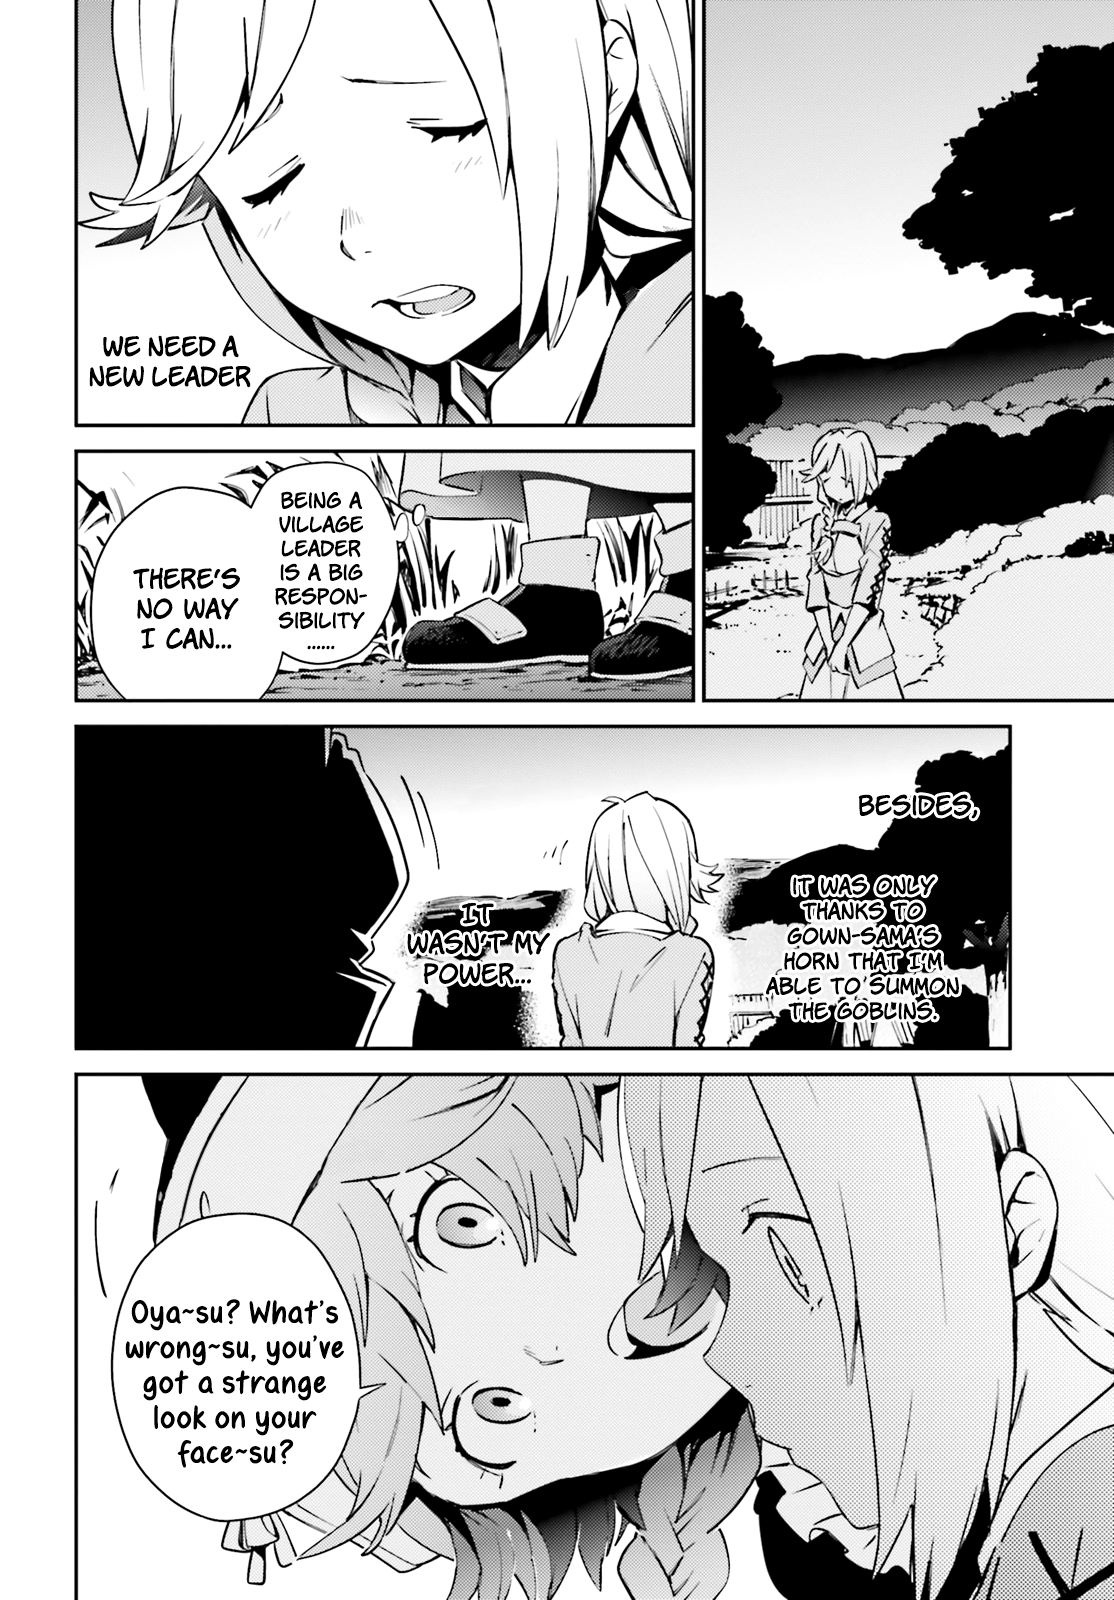 Overlord - Page 2